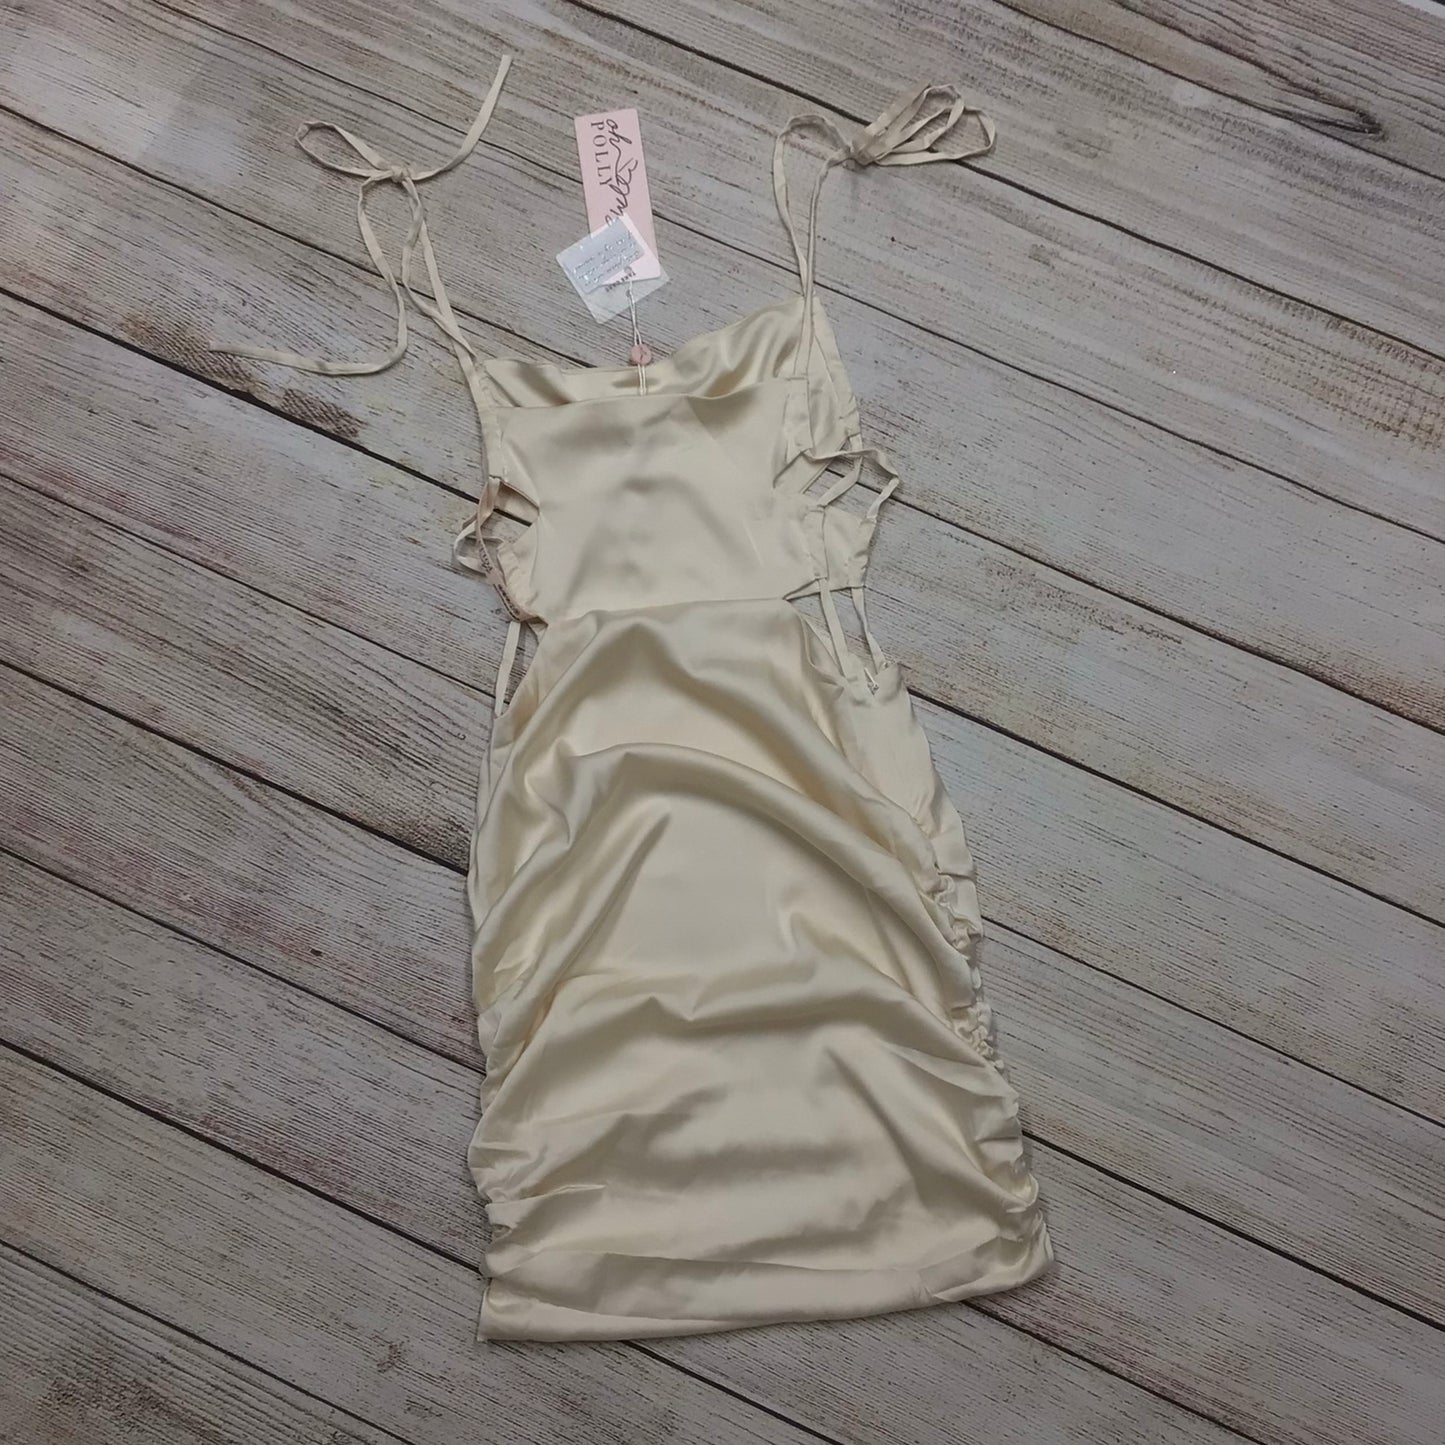 BNWT Oh Polly Ivory Ruched Dress w/Tie Straps & Cut Out Size 8